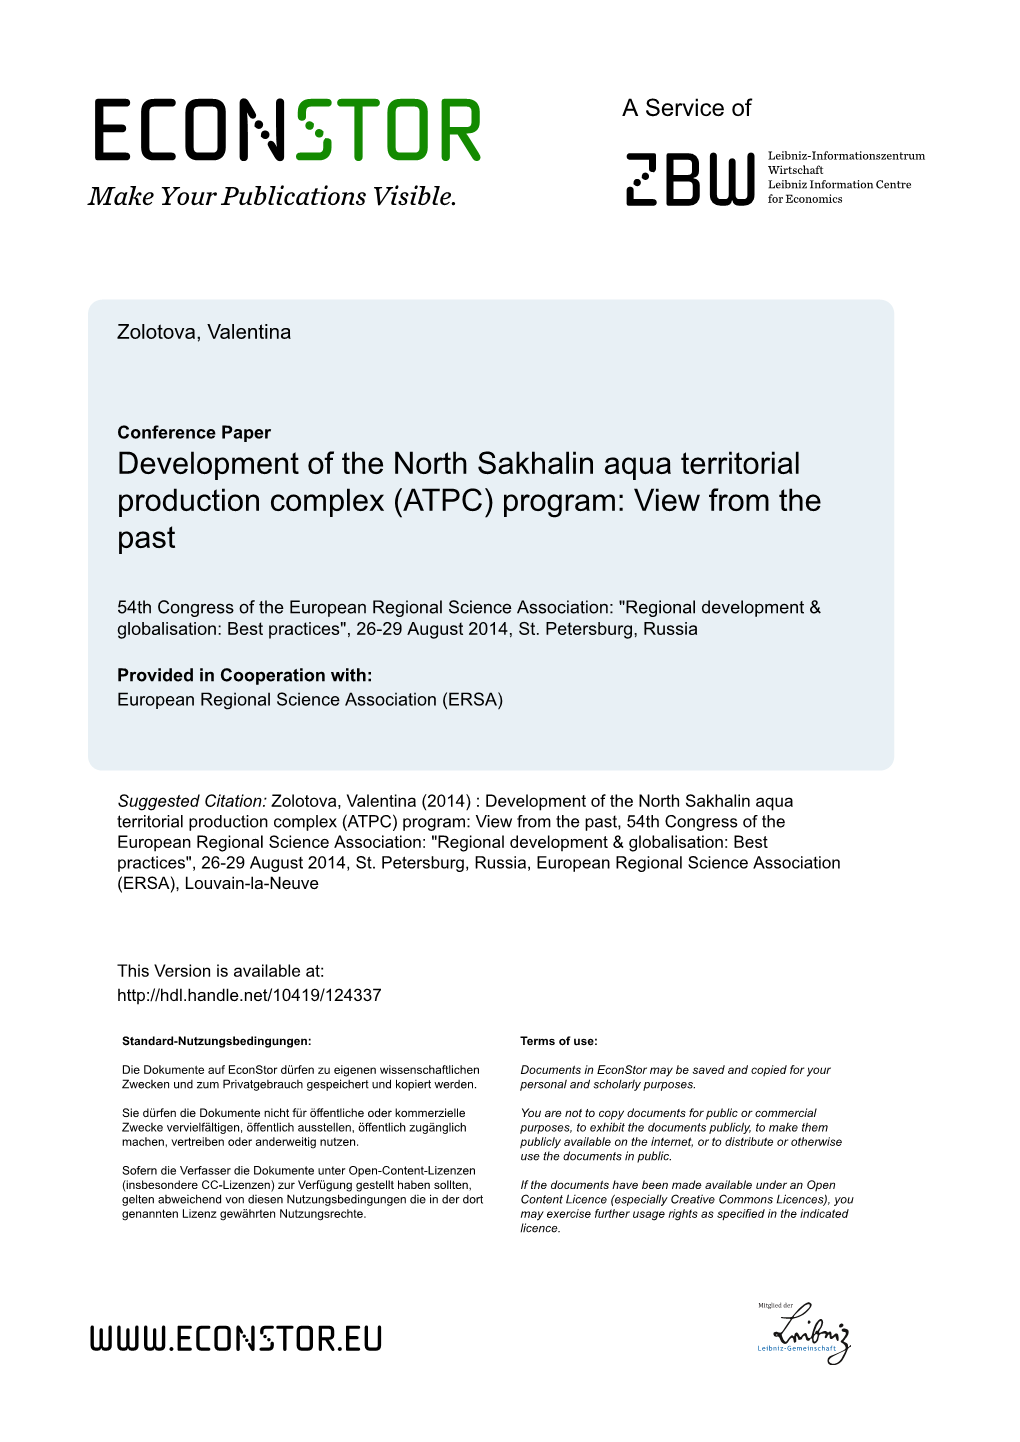 Development of the North Sakhalin Aqua Territorial Production Complex (ATPC) Program: View from the Past